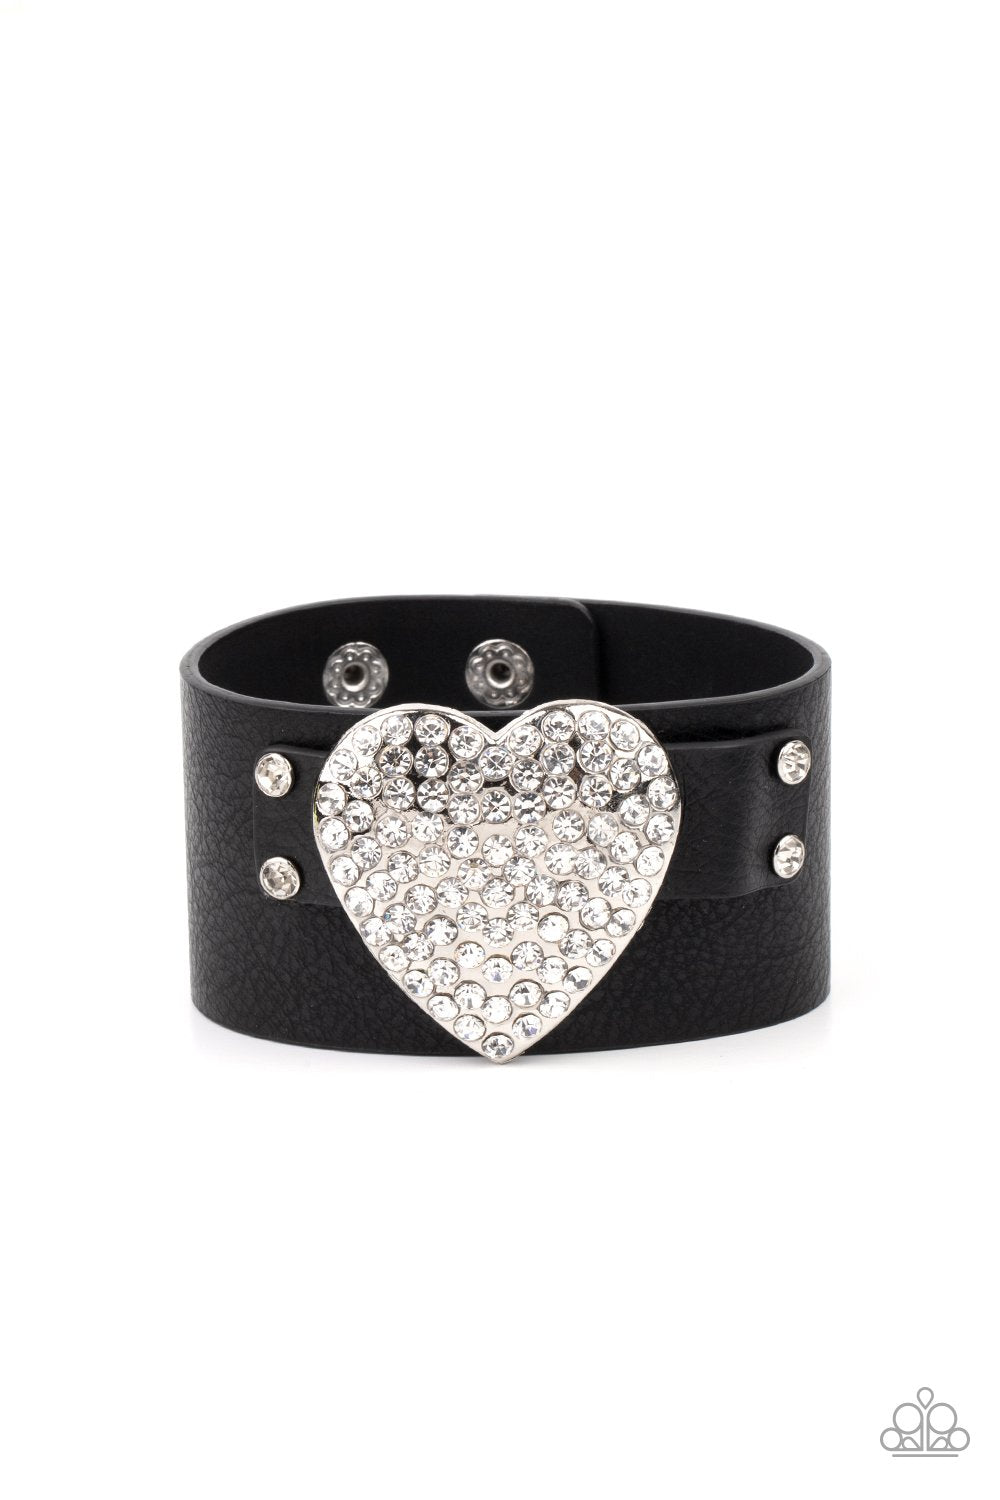 Flauntable Flirt Black Leather and White Rhinestone Heart Wrap Snap Bracelet - Paparazzi Accessories LOTP Exclusive July 2021- lightbox - CarasShop.com - $5 Jewelry by Cara Jewels